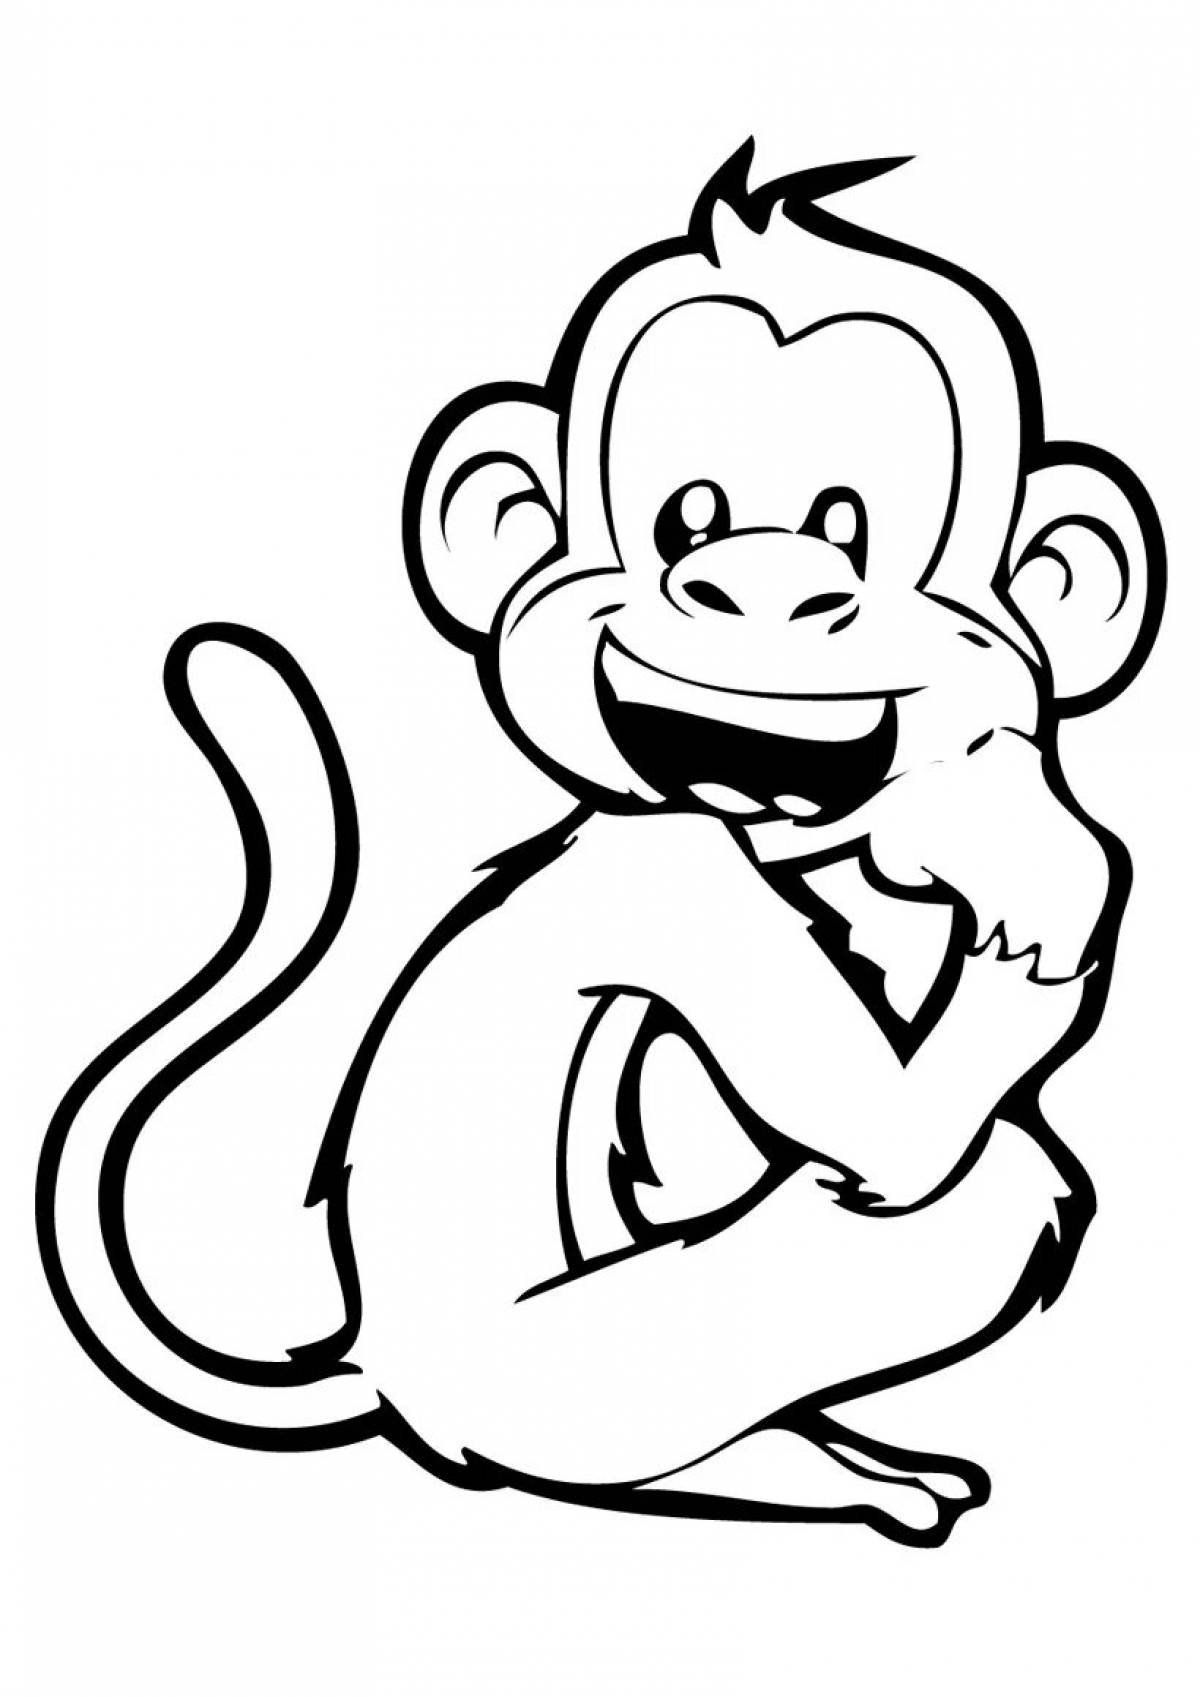 Coloring book brave monkey